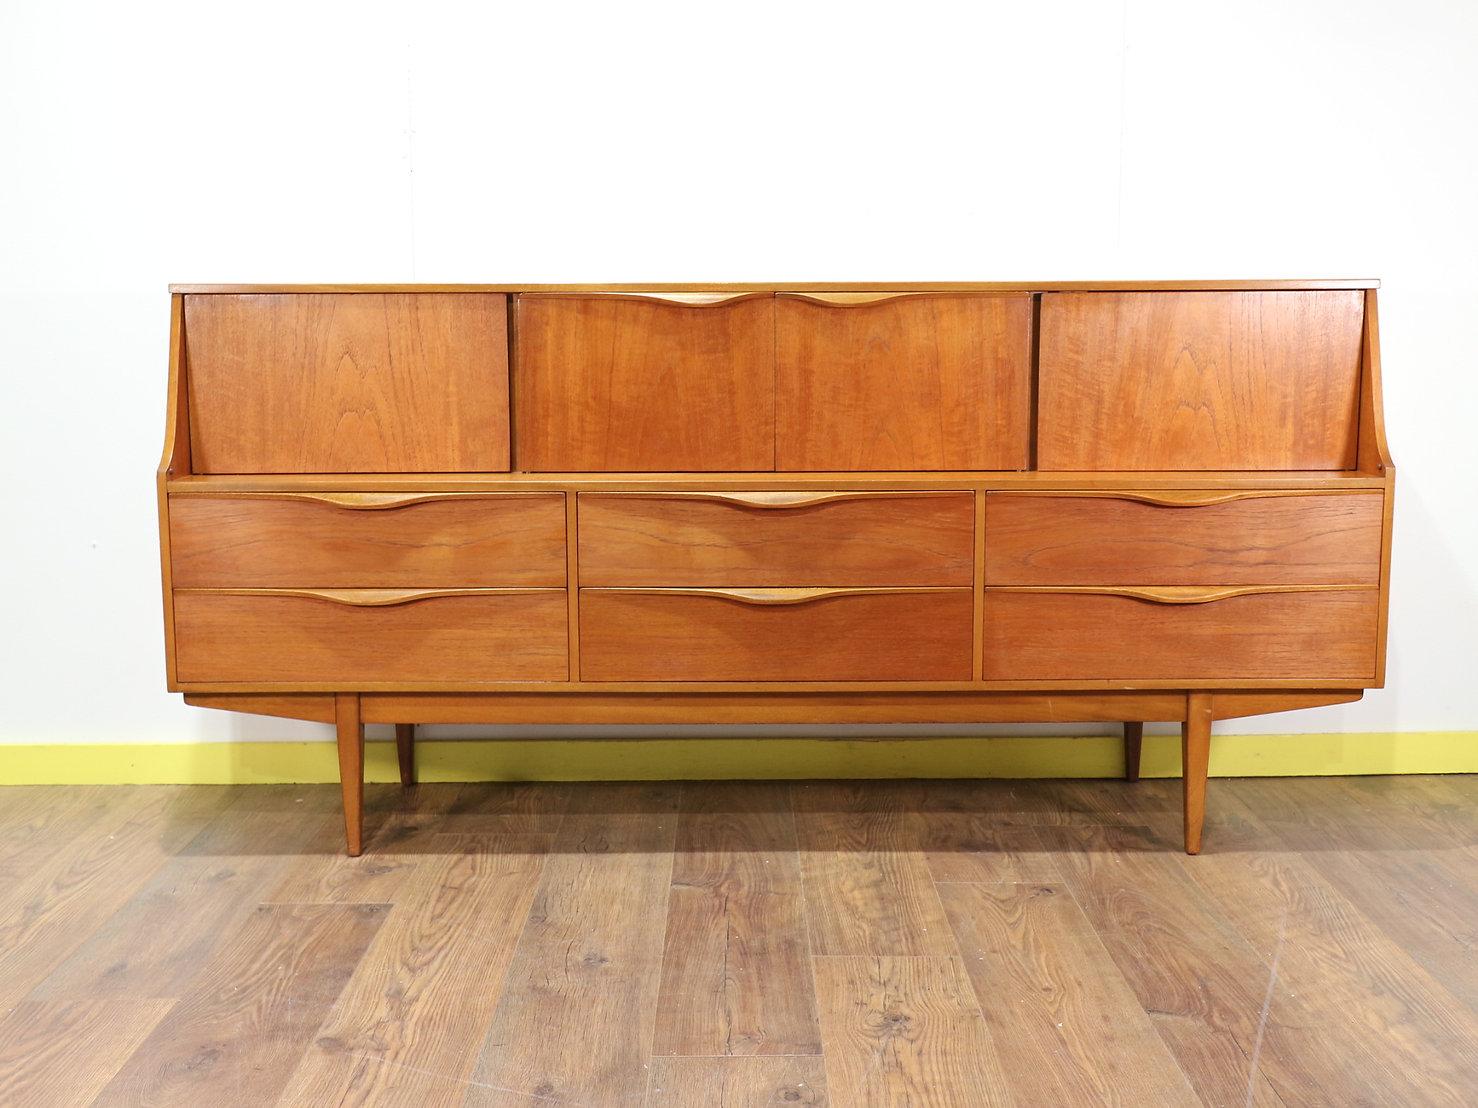 A fabulous credenza made by British furniture maker Sutcliffe of Todmorden in the 1960s. Stunning sculpted handles and a beautiful grain plus plenty of storage ake this cabinet a must.

 

Dimensions 

w72 d18.5 h34.5

 

Condition

